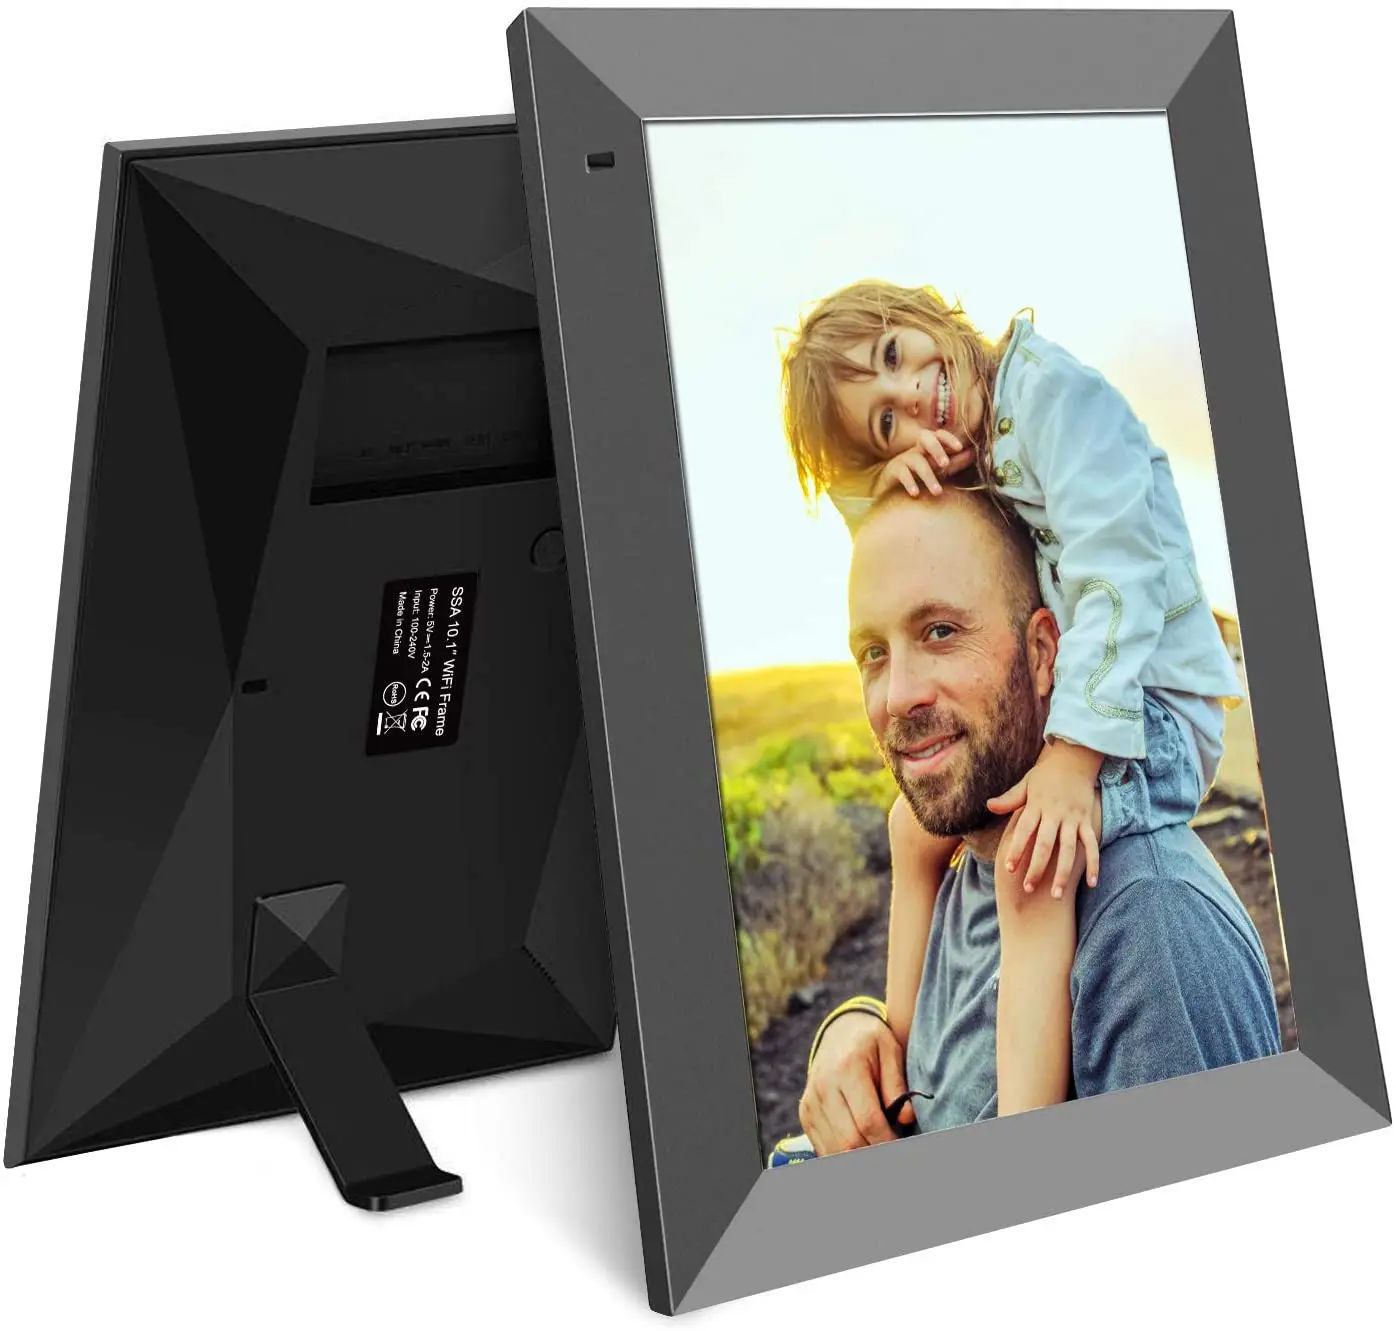 

christmas gift Frameo app 10.1 inch IPS Display Auto-Rotate Share Photos via App Email Wifi Touch Digital Picture Frame